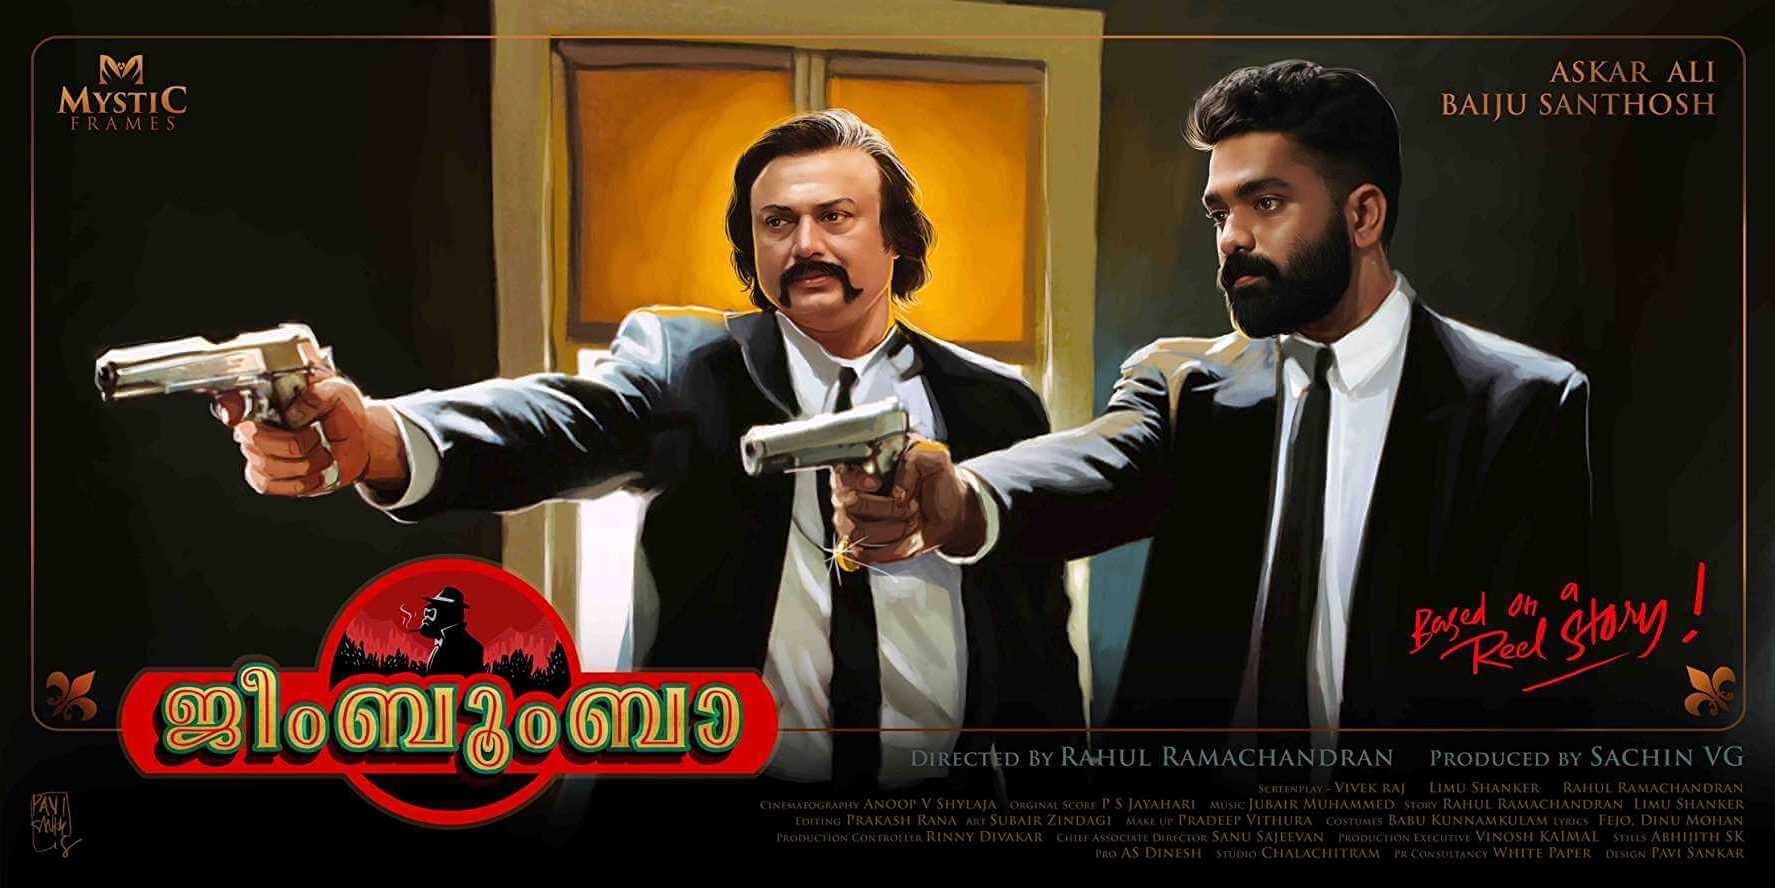 #Jeem Boom Bhaa 2019 film Reviews and Ratings